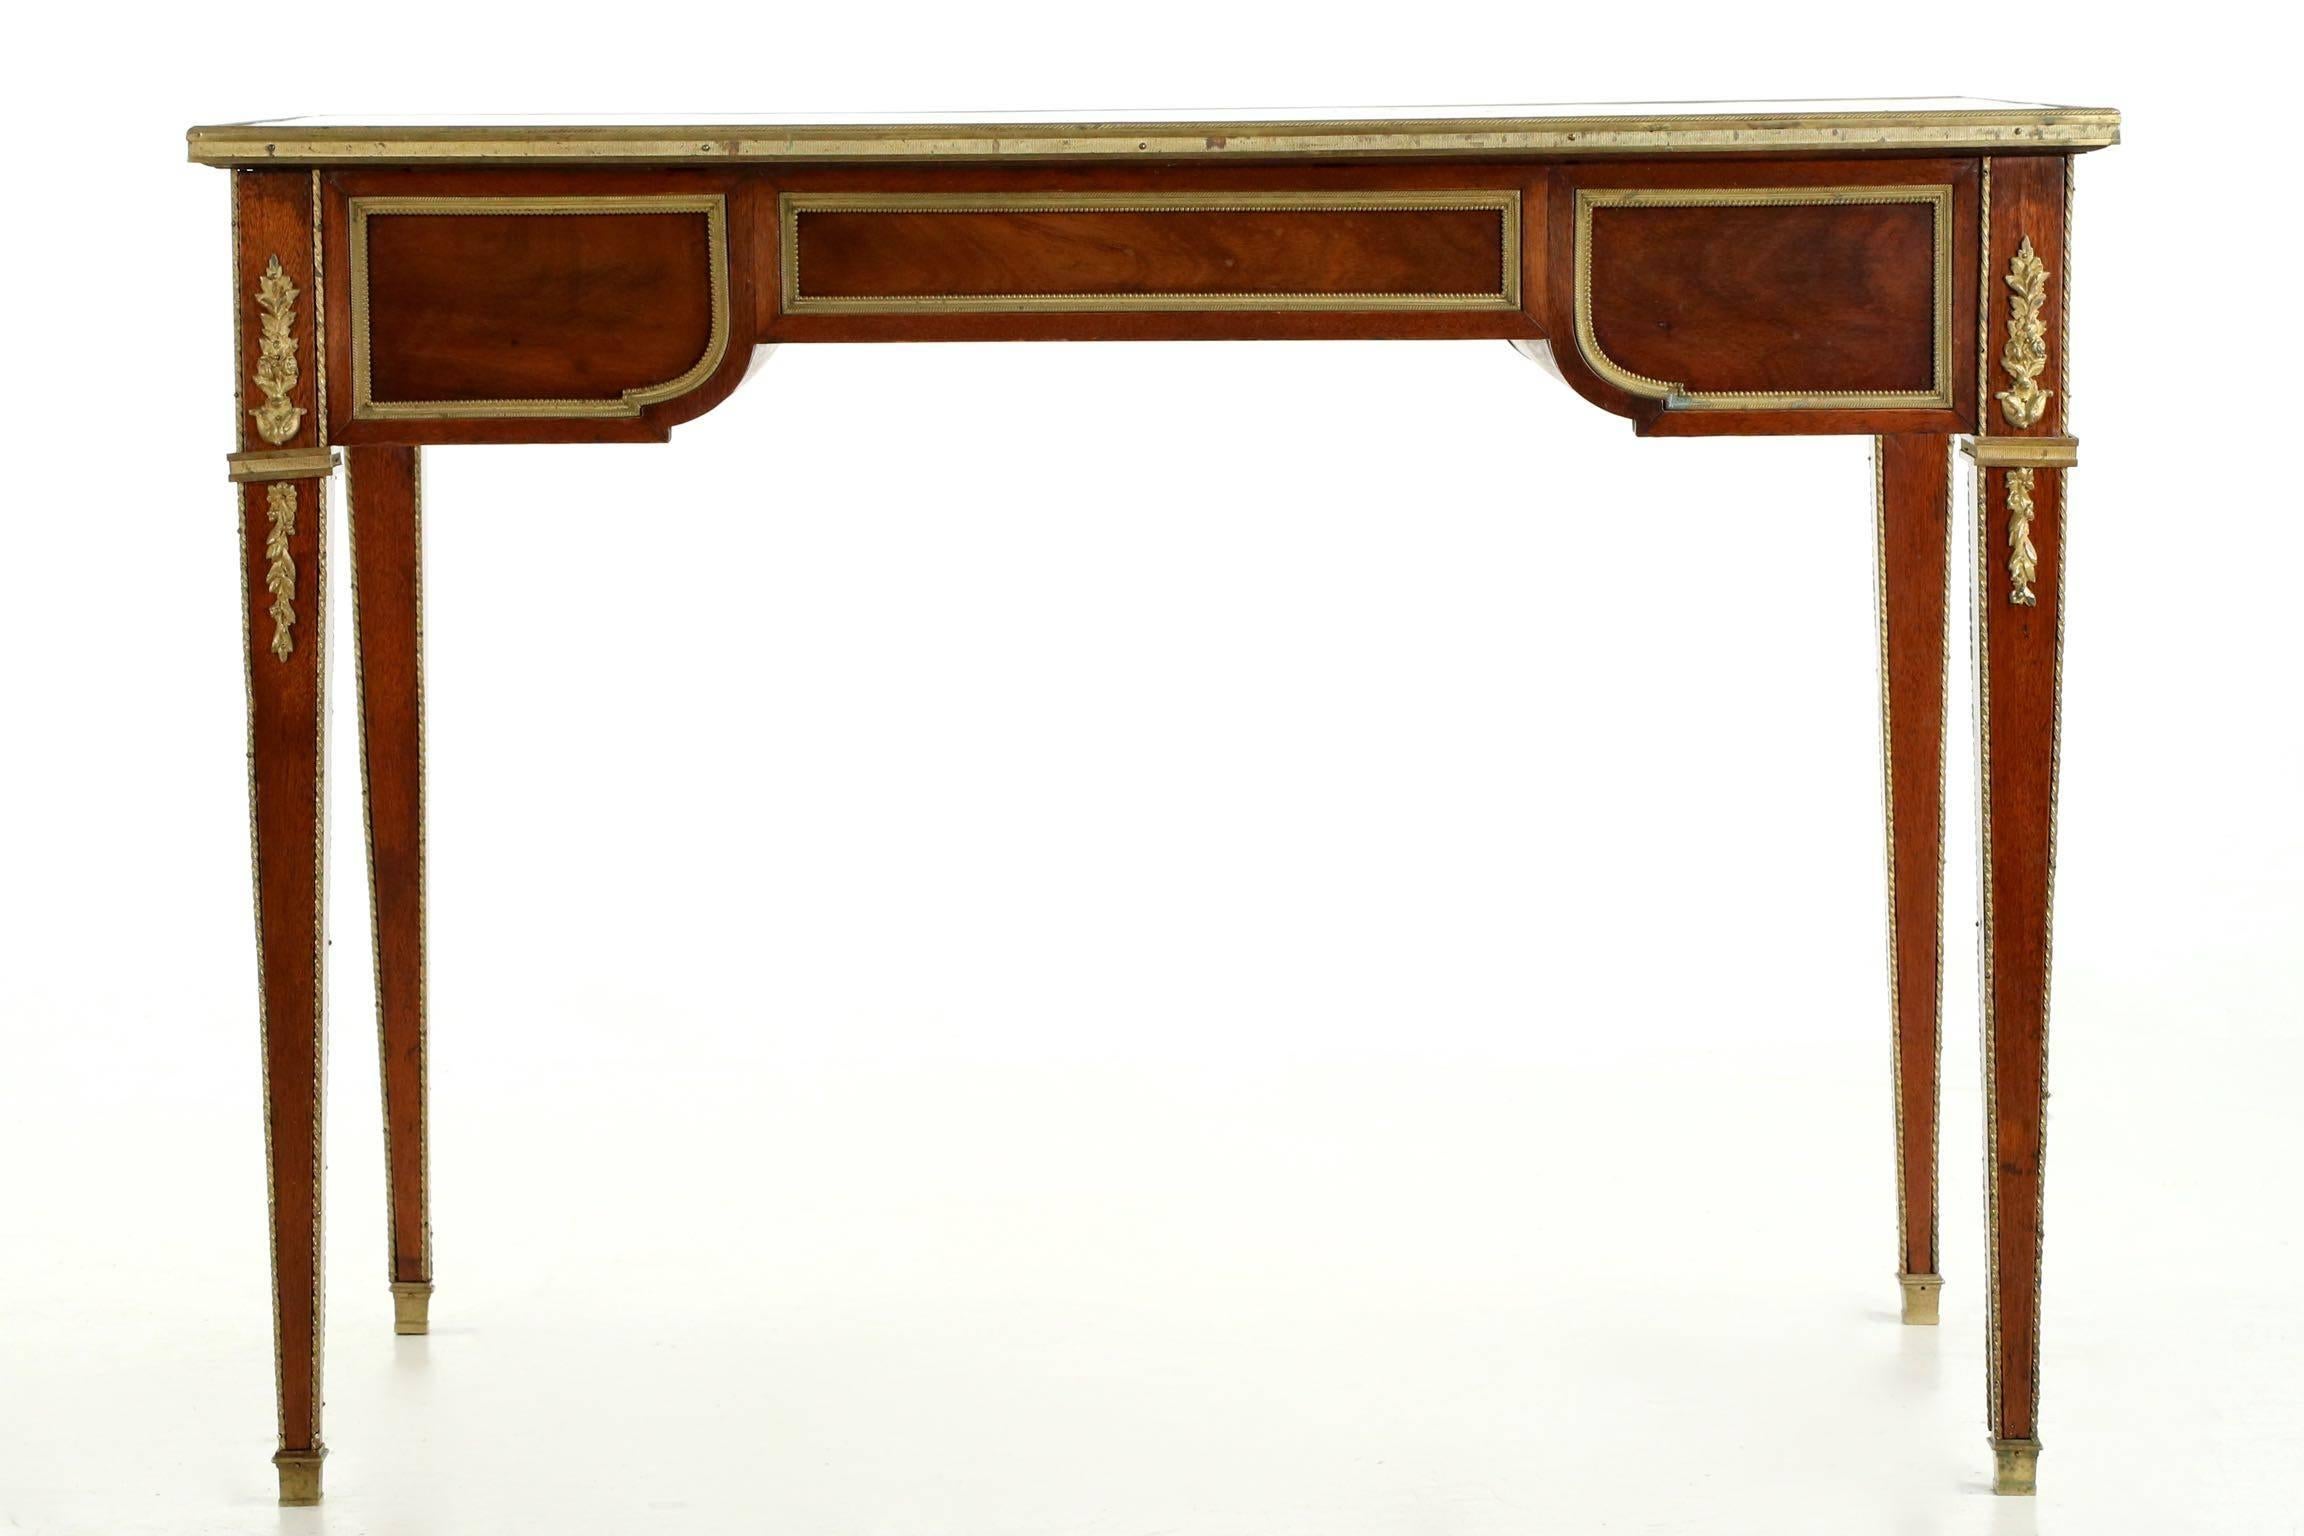 20th Century French Neoclassical Antique Mahogany Bureau Plat Writing Table Desk (Französisch)